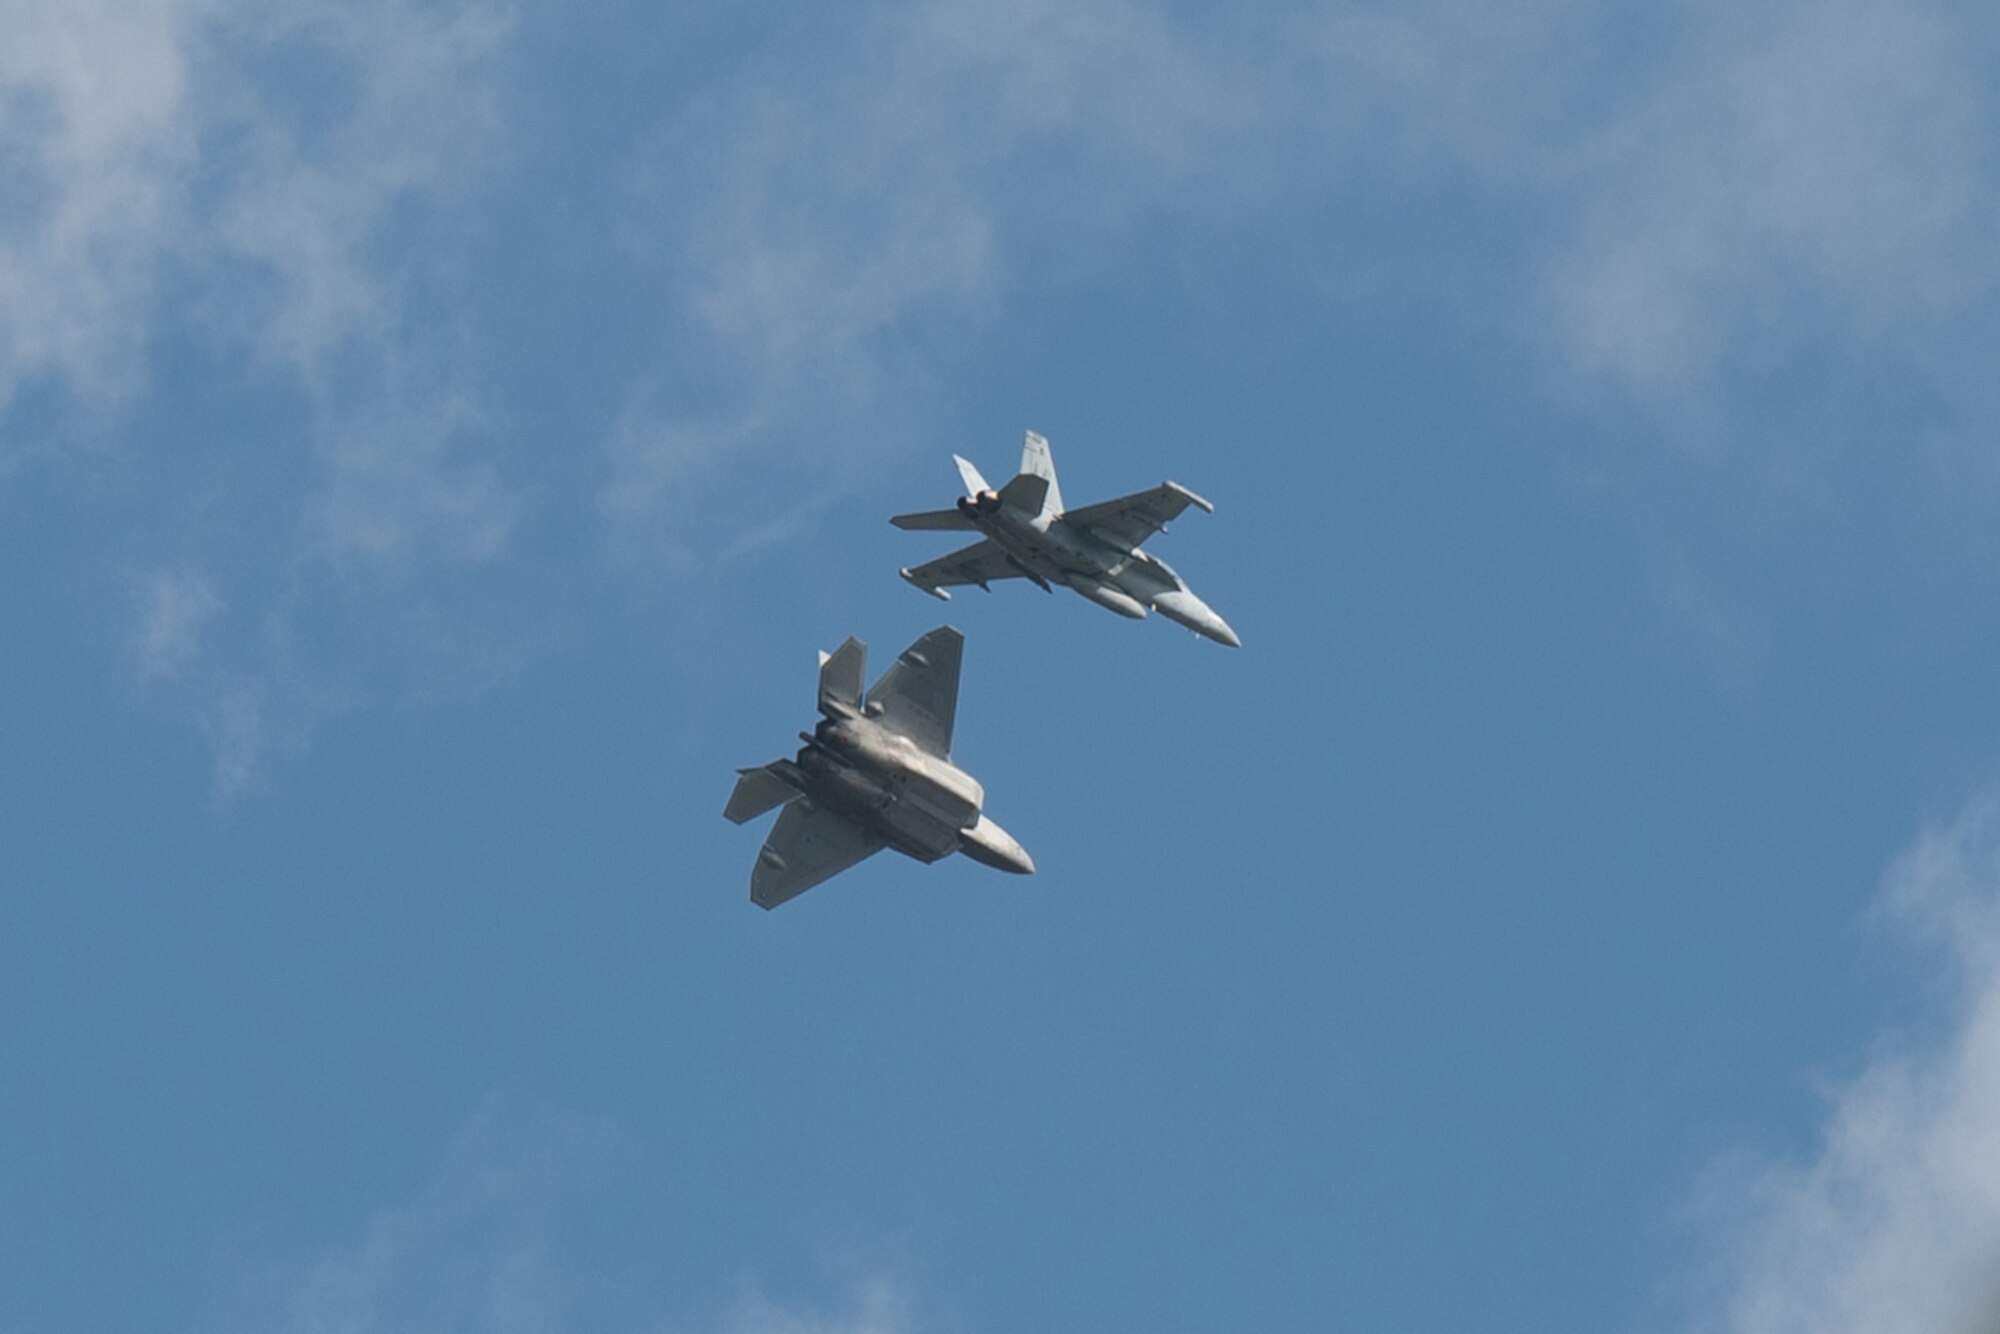 A Hawaii Air National Guard F-22 Raptor and a Navy Reserve VAQ-209 EA-18G Growler execute combat air-to-air exercises Jan. 21, 2022 Joint Base Pearl Harbor-Hickam, Hawaii. The exercise is held to provide participants a multi-faceted, joint venue with supporting infrastructure and personnel.